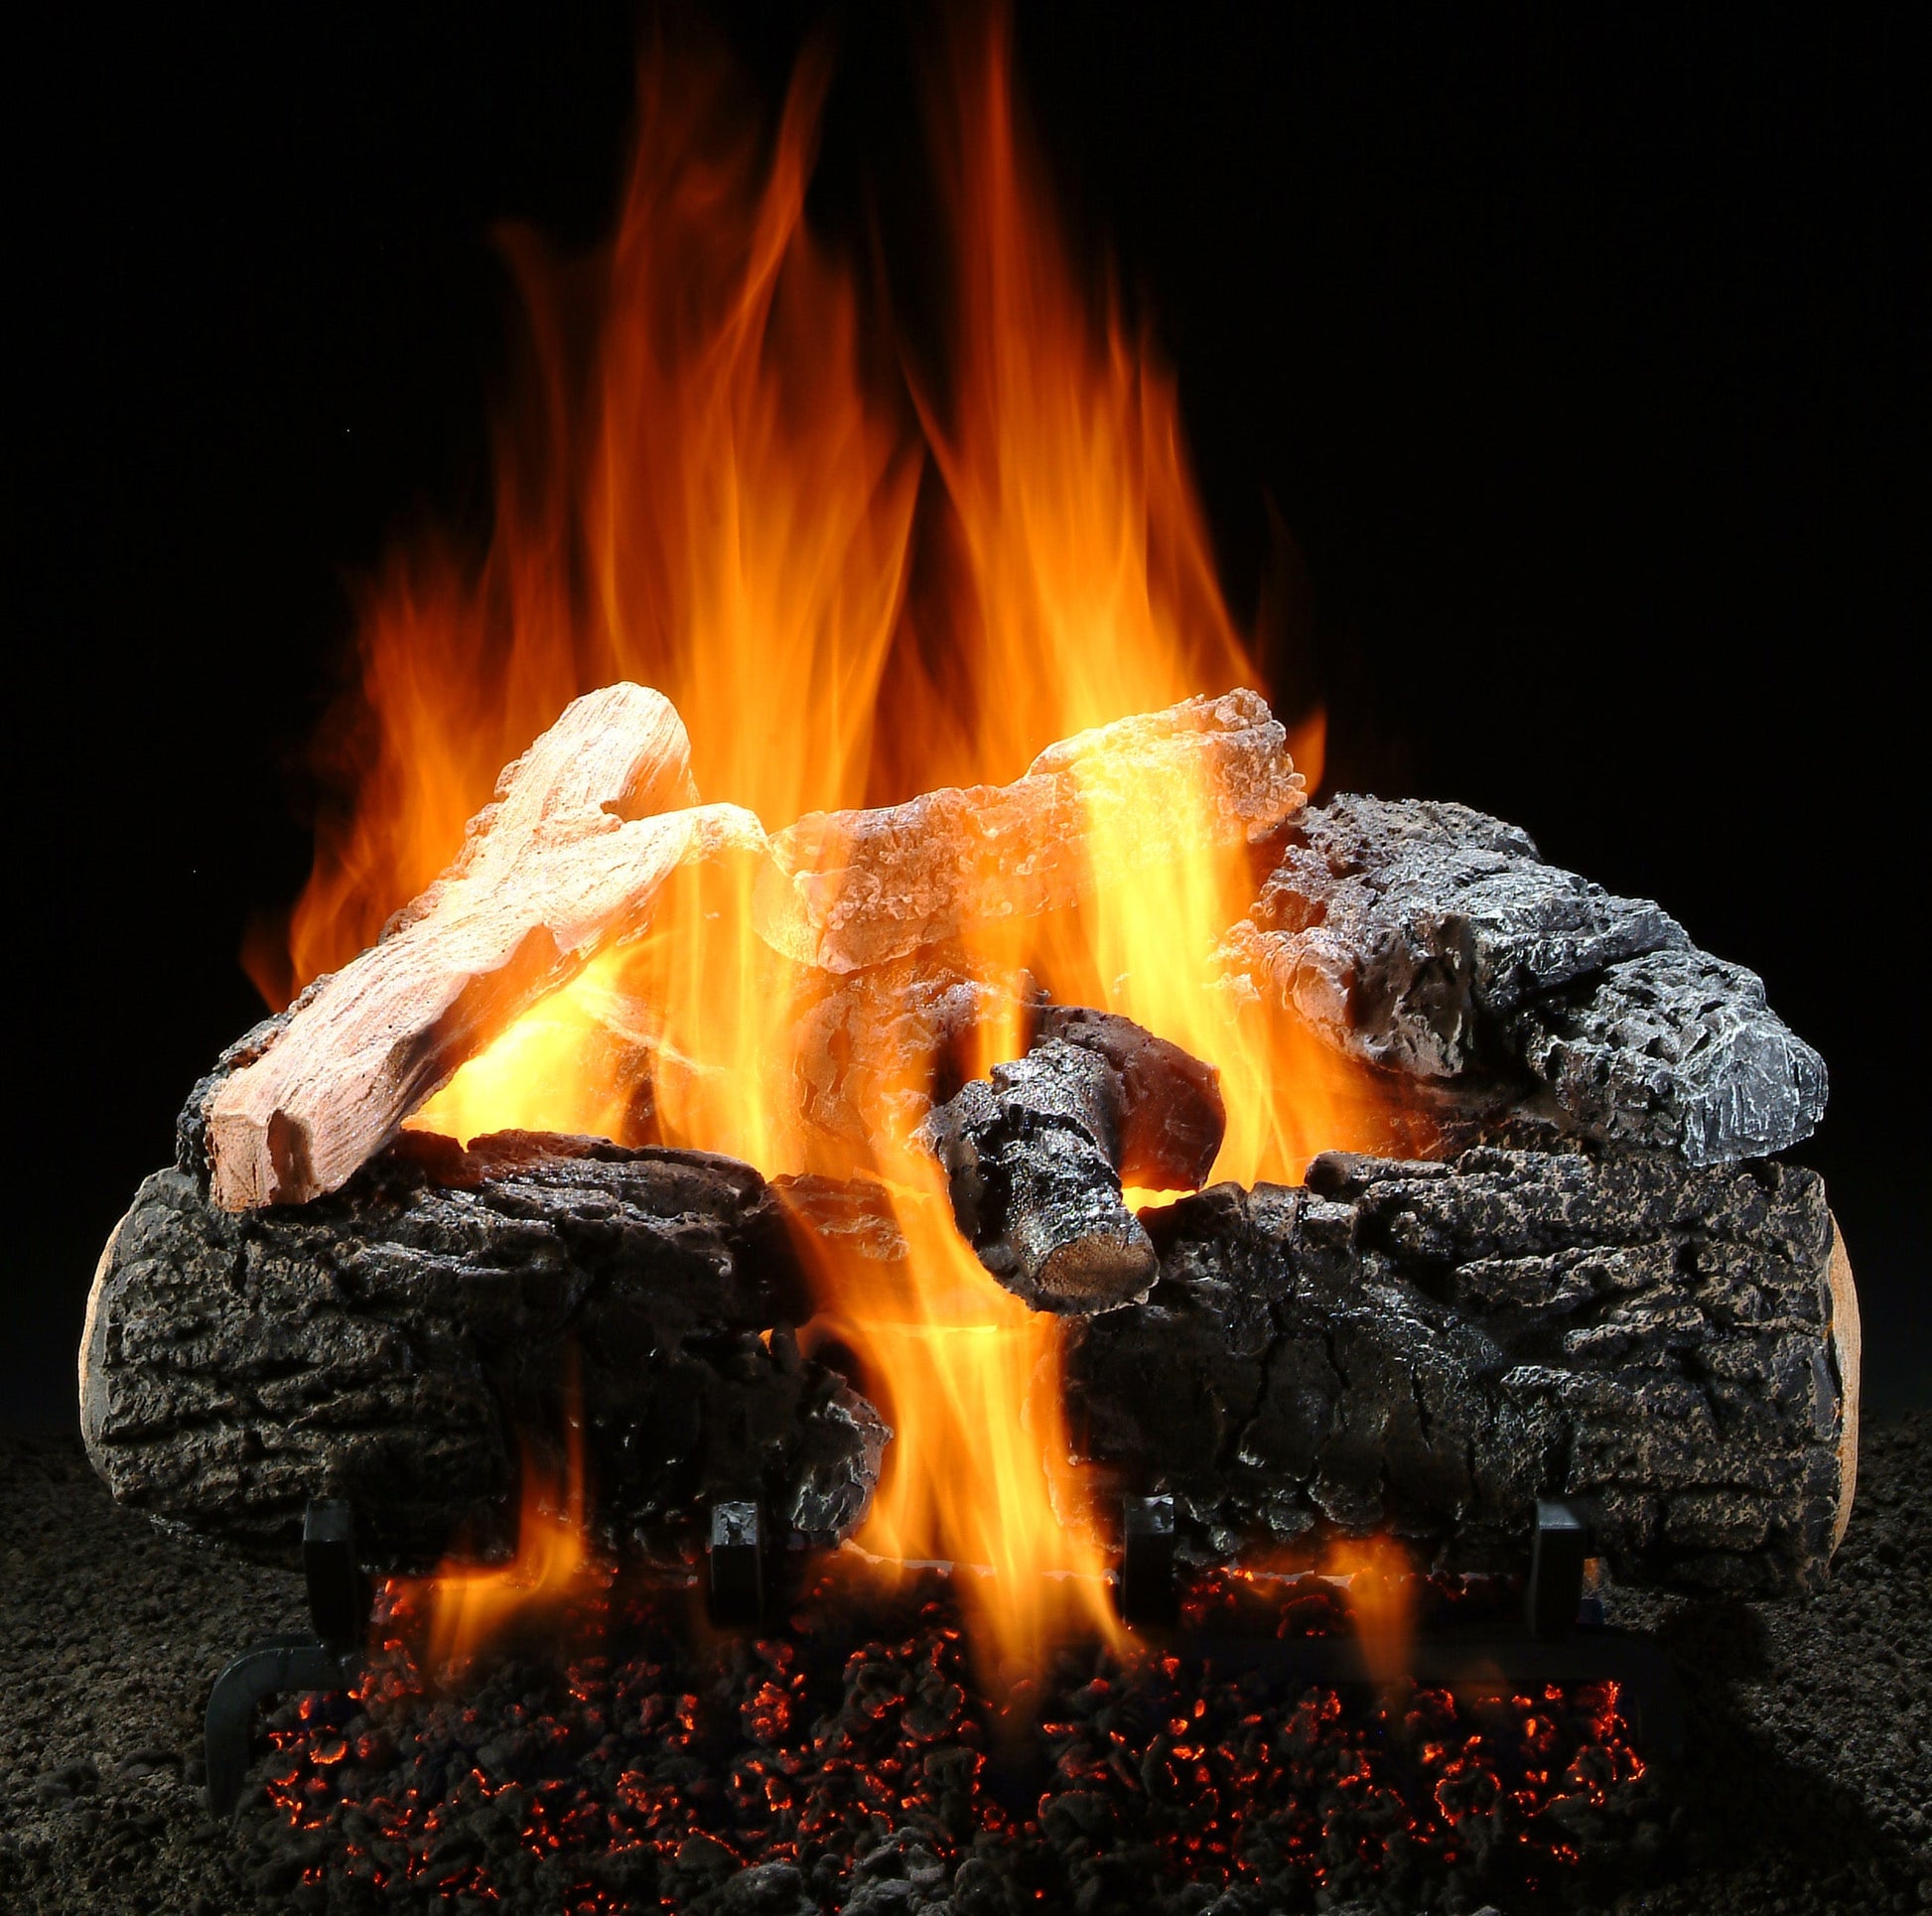 Hargrove 24 Inch Charred Series Vented Gas Log Set With Variable Flame Control - 24RNEB1F5